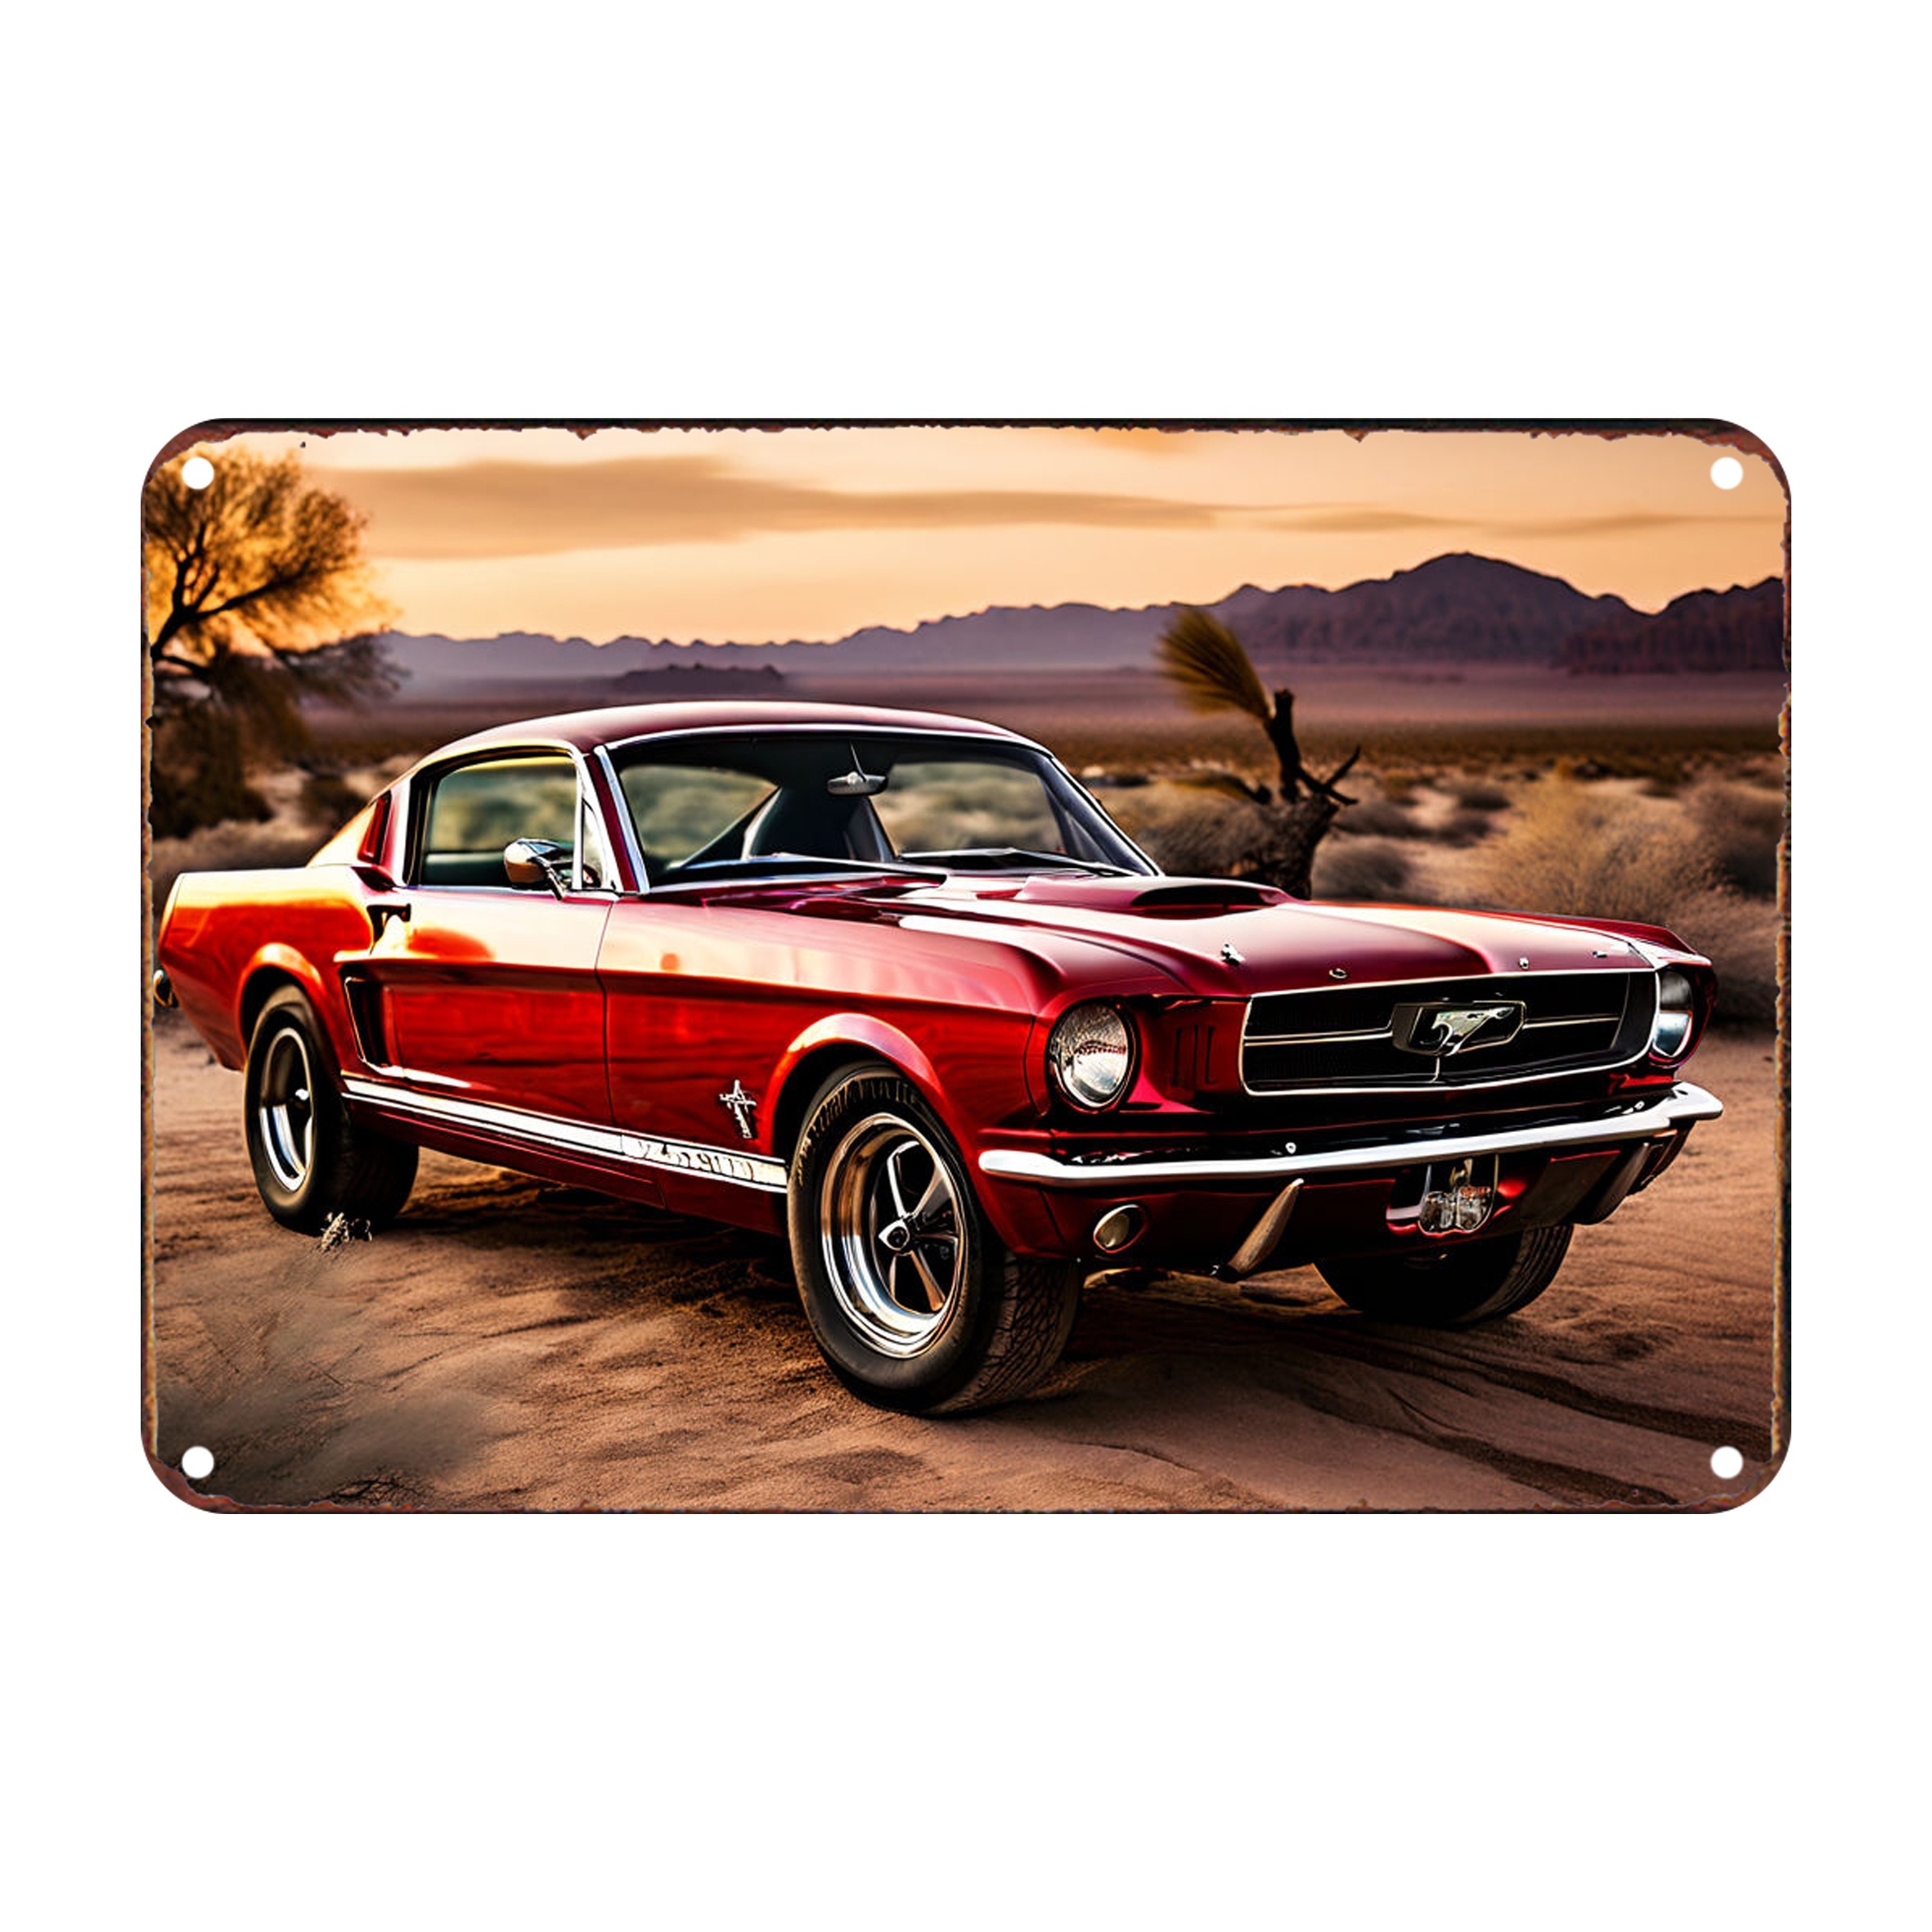 

classic Auto" Vintage Sports Car Metal Tin Sign - 7.87x11.81" | Durable, Waterproof Wall Art For Home, Kitchen, Garden, Bedroom, Farmhouse & More